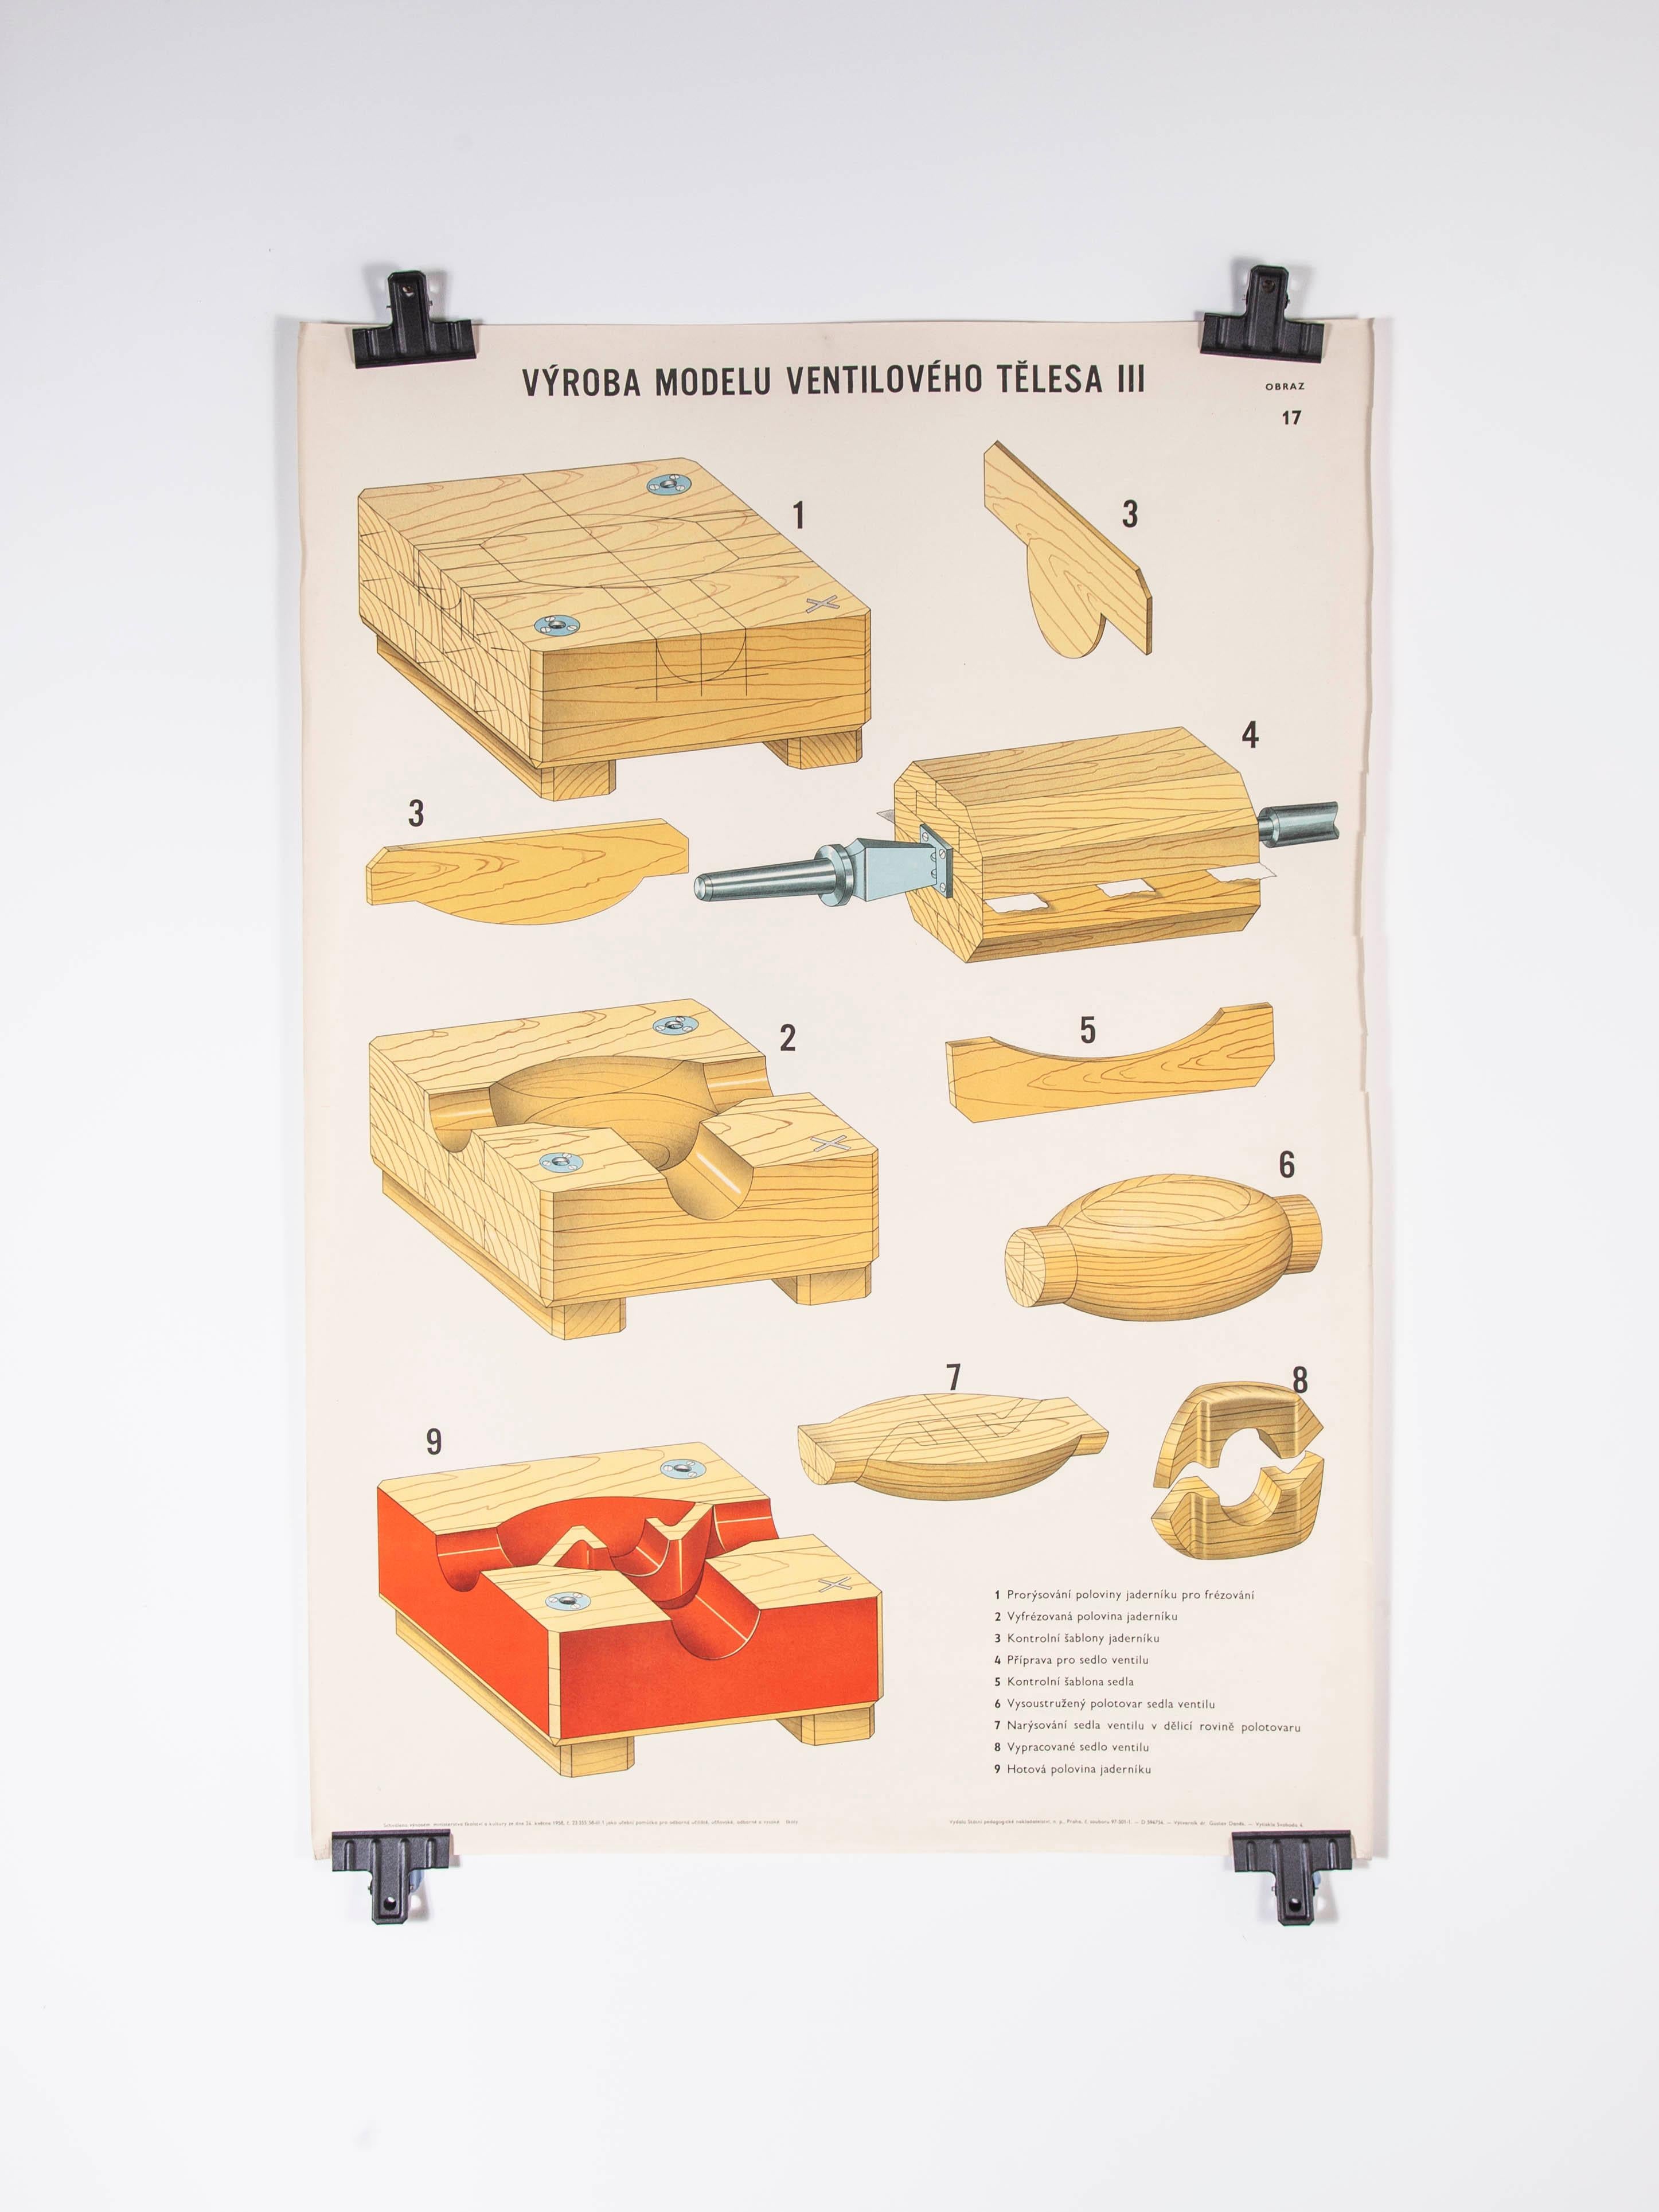 Czech Technical Industrial drawing, foundry mould engineering poster, 17

Sourced from an old engineering workshop in the Czech Republic, an amazing series of technical industrial drawings explaining the process of sand casting and creating the